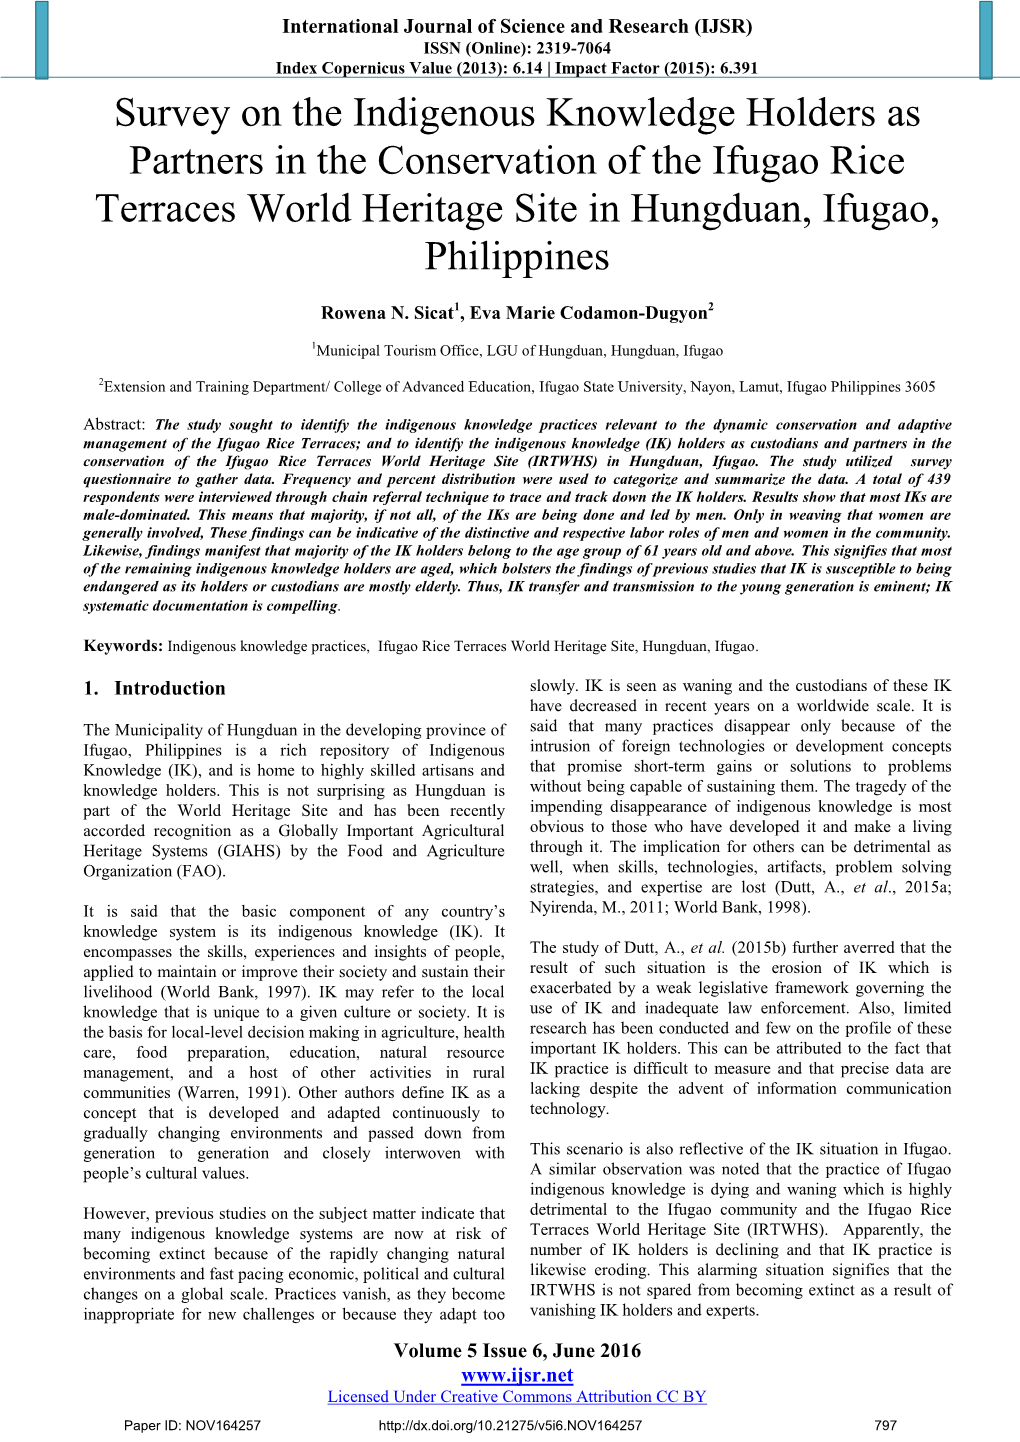 Survey on the Indigenous Knowledge Holders As Partners in the Conservation of the Ifugao Rice Terraces World Heritage Site in Hungduan, Ifugao, Philippines